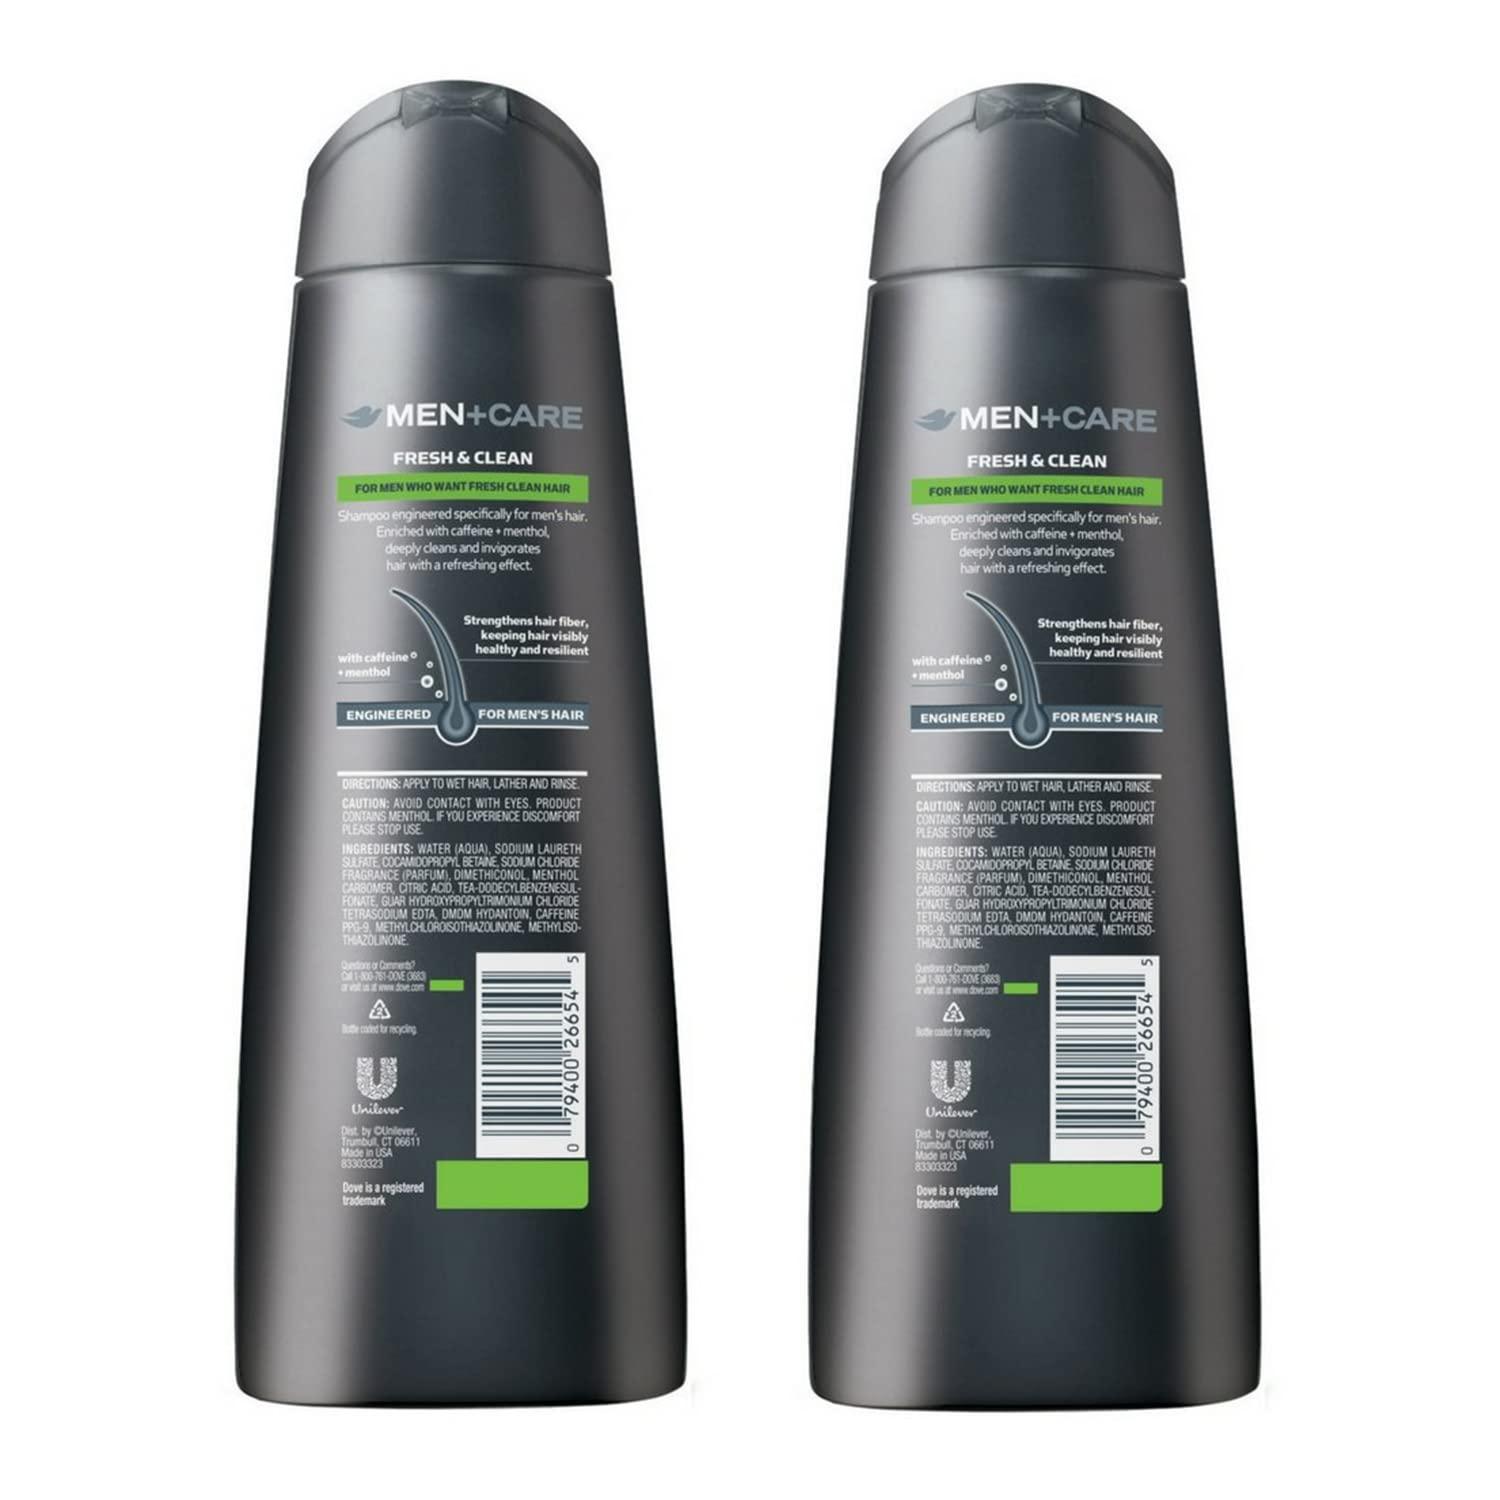 Dove Men+Care Fortifying 2 in 1 Shampoo and Conditioner, Fresh and Clean  for Normal to Oily Hair with Caffeine and Menthol to Help Strengthen &  Nourish Hair, 12 fl oz, Pack of 2